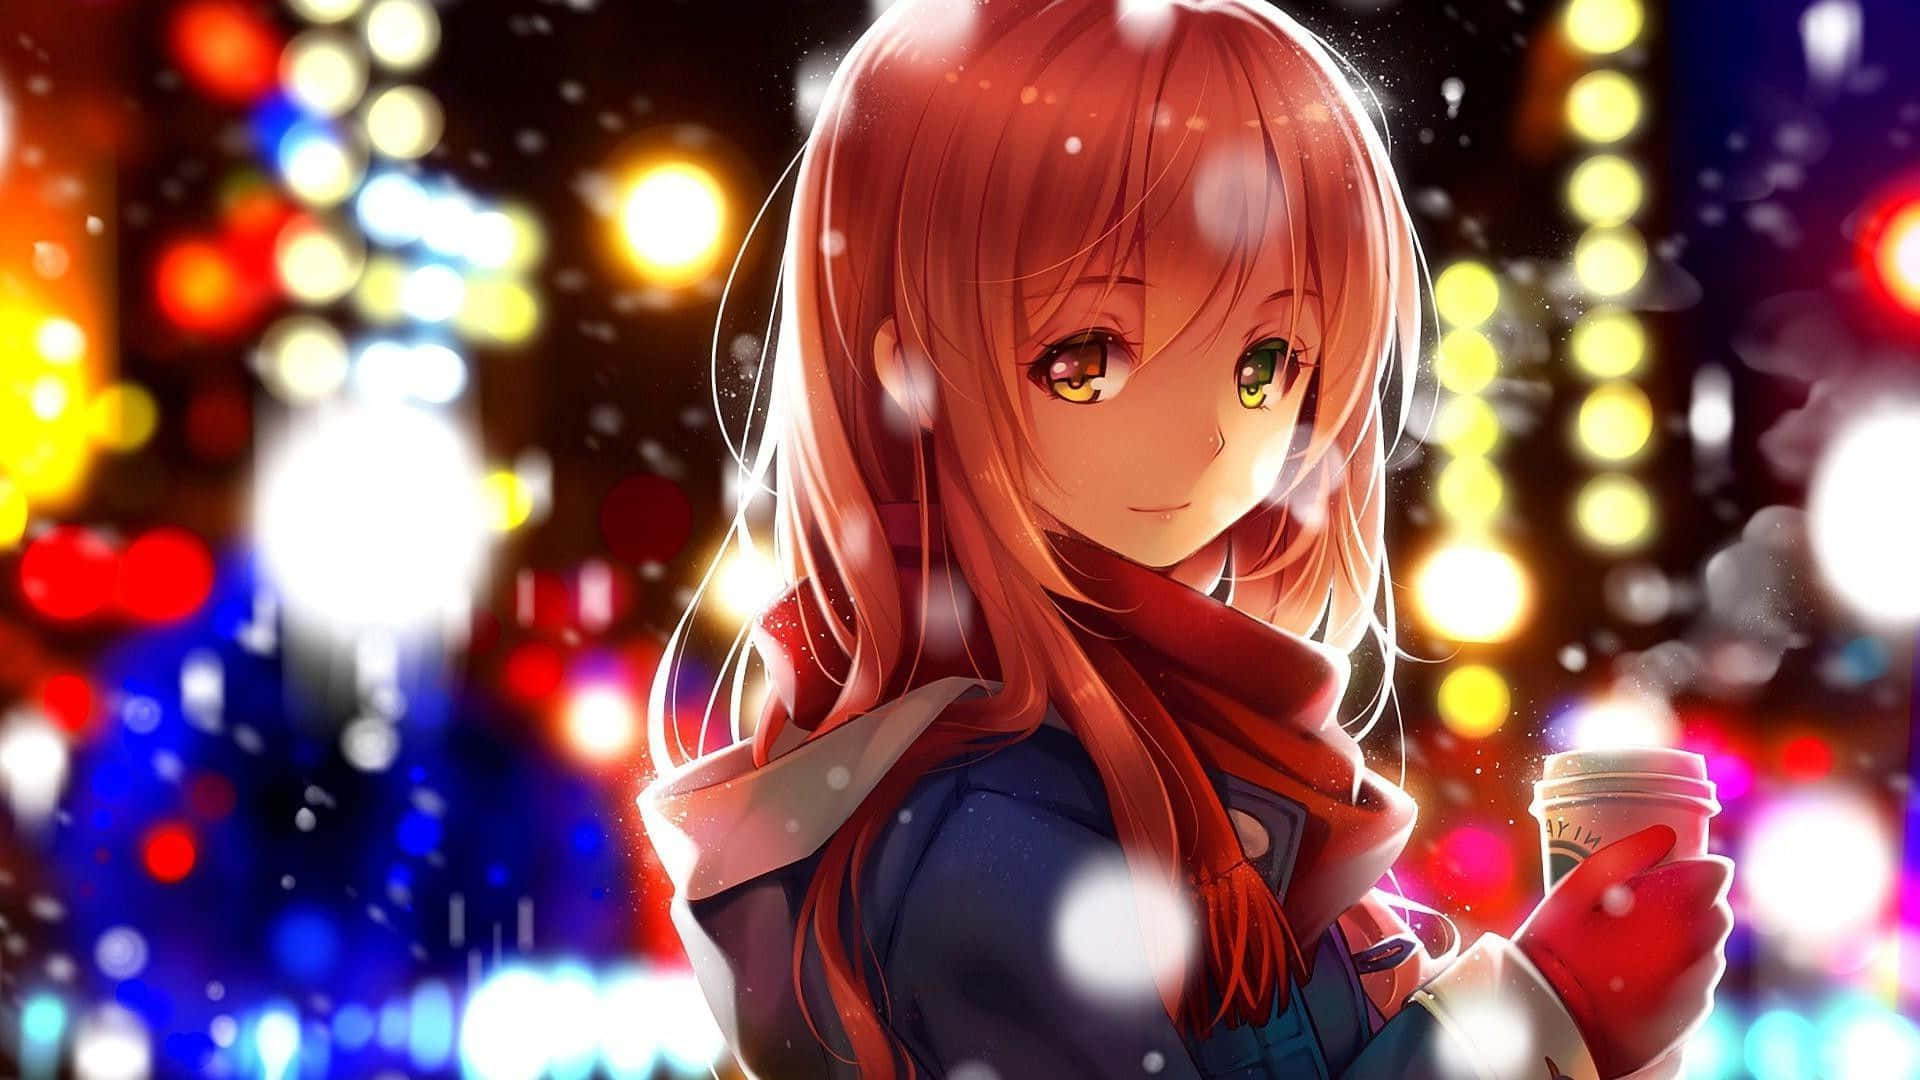 Download Anime Images Cute Anime Girl Hd Wallpaper And Background